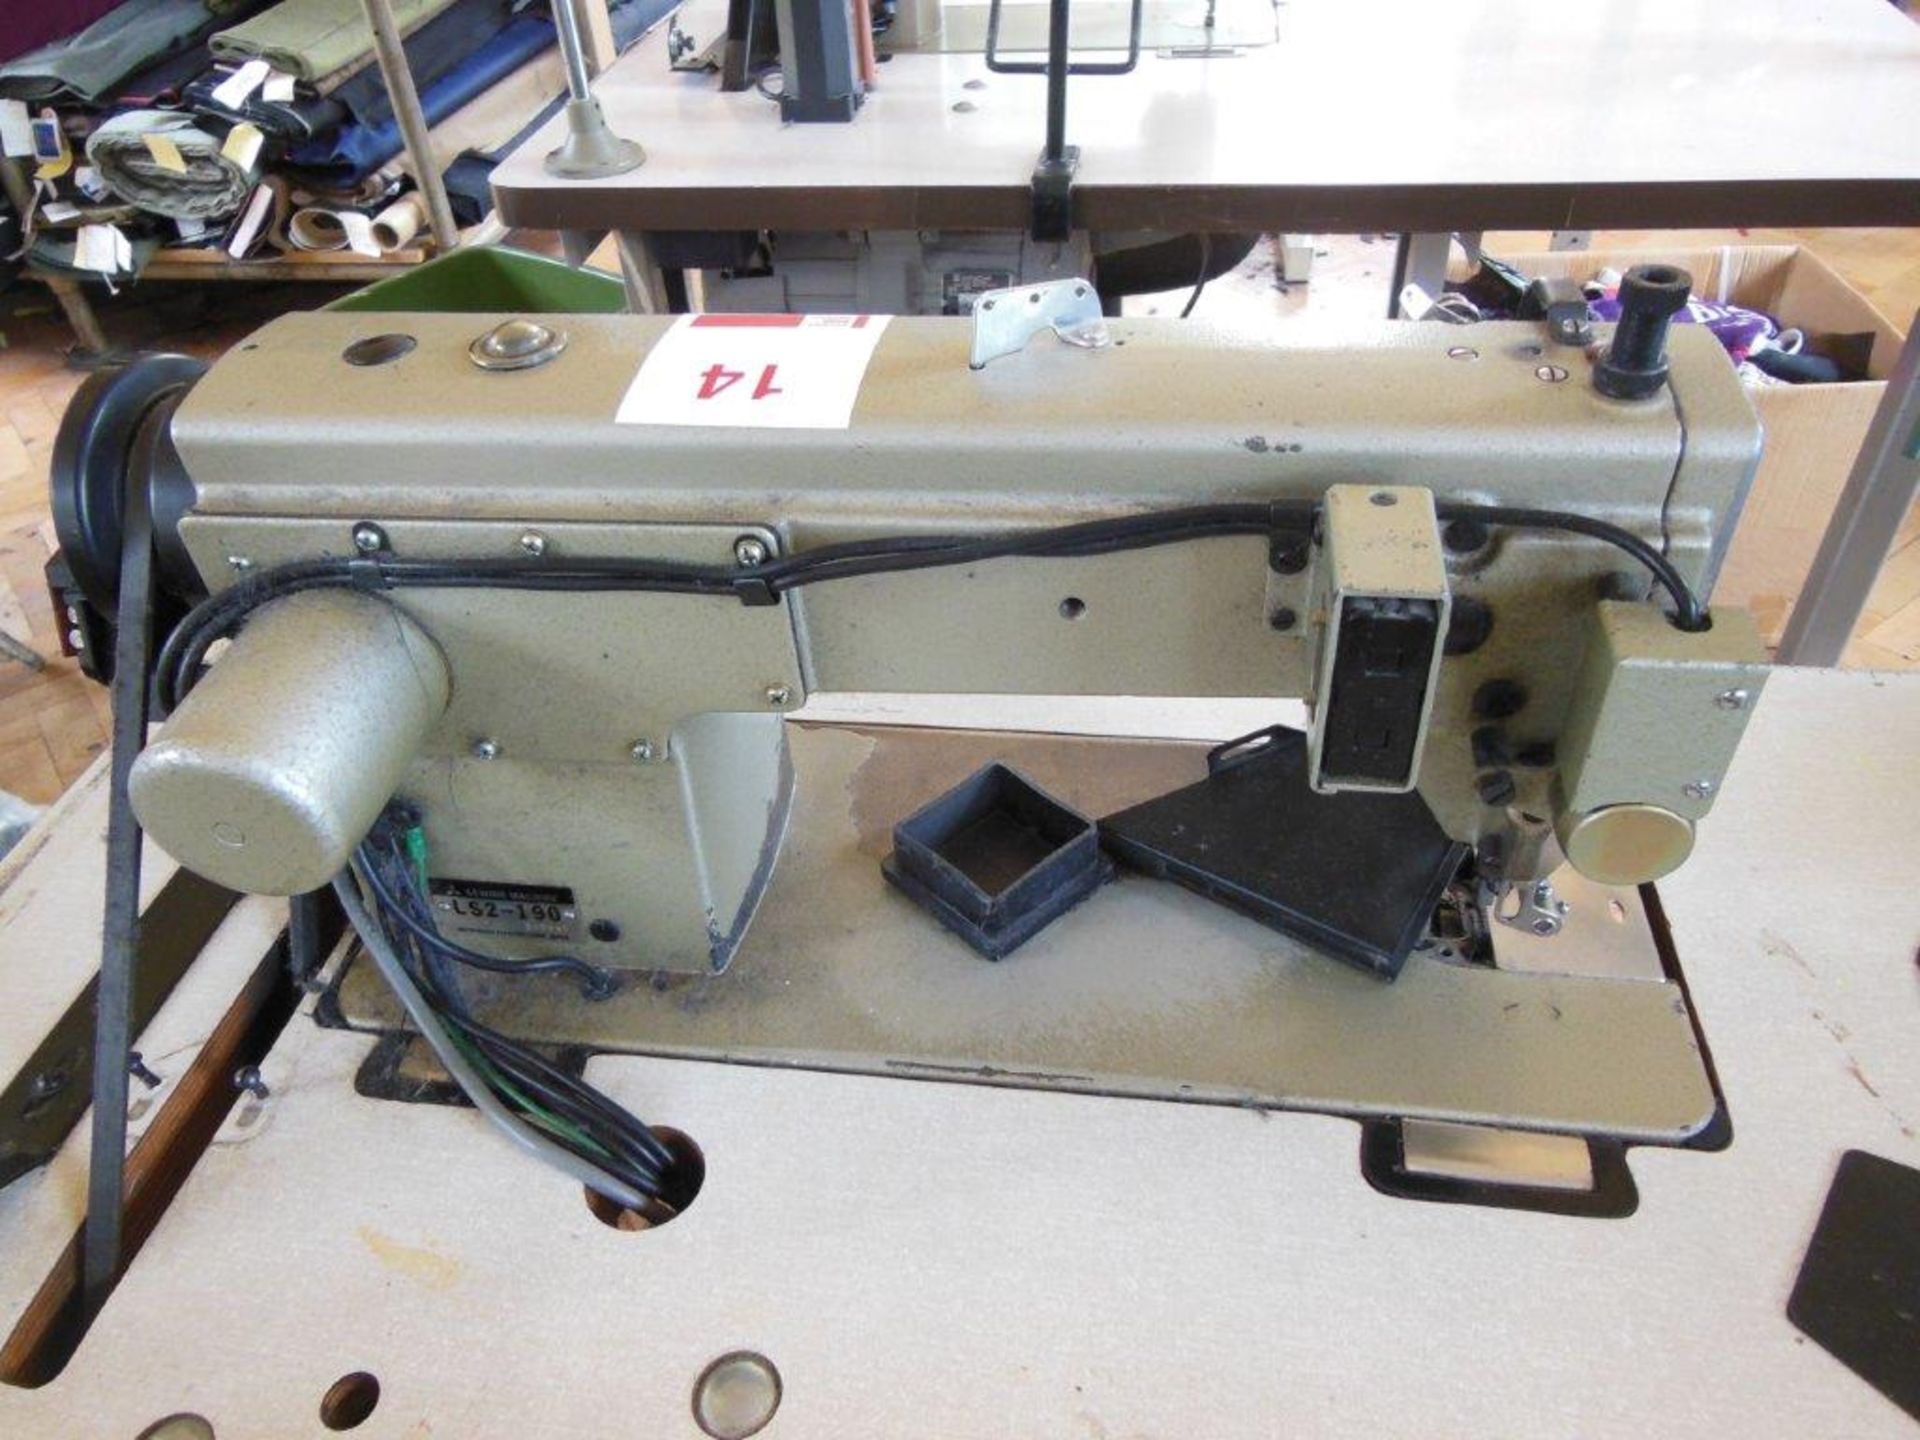 Mitsubishi LS2-190 industrial flatbed sewing machine, three phase. NB: this item has no CE marking. - Image 3 of 4